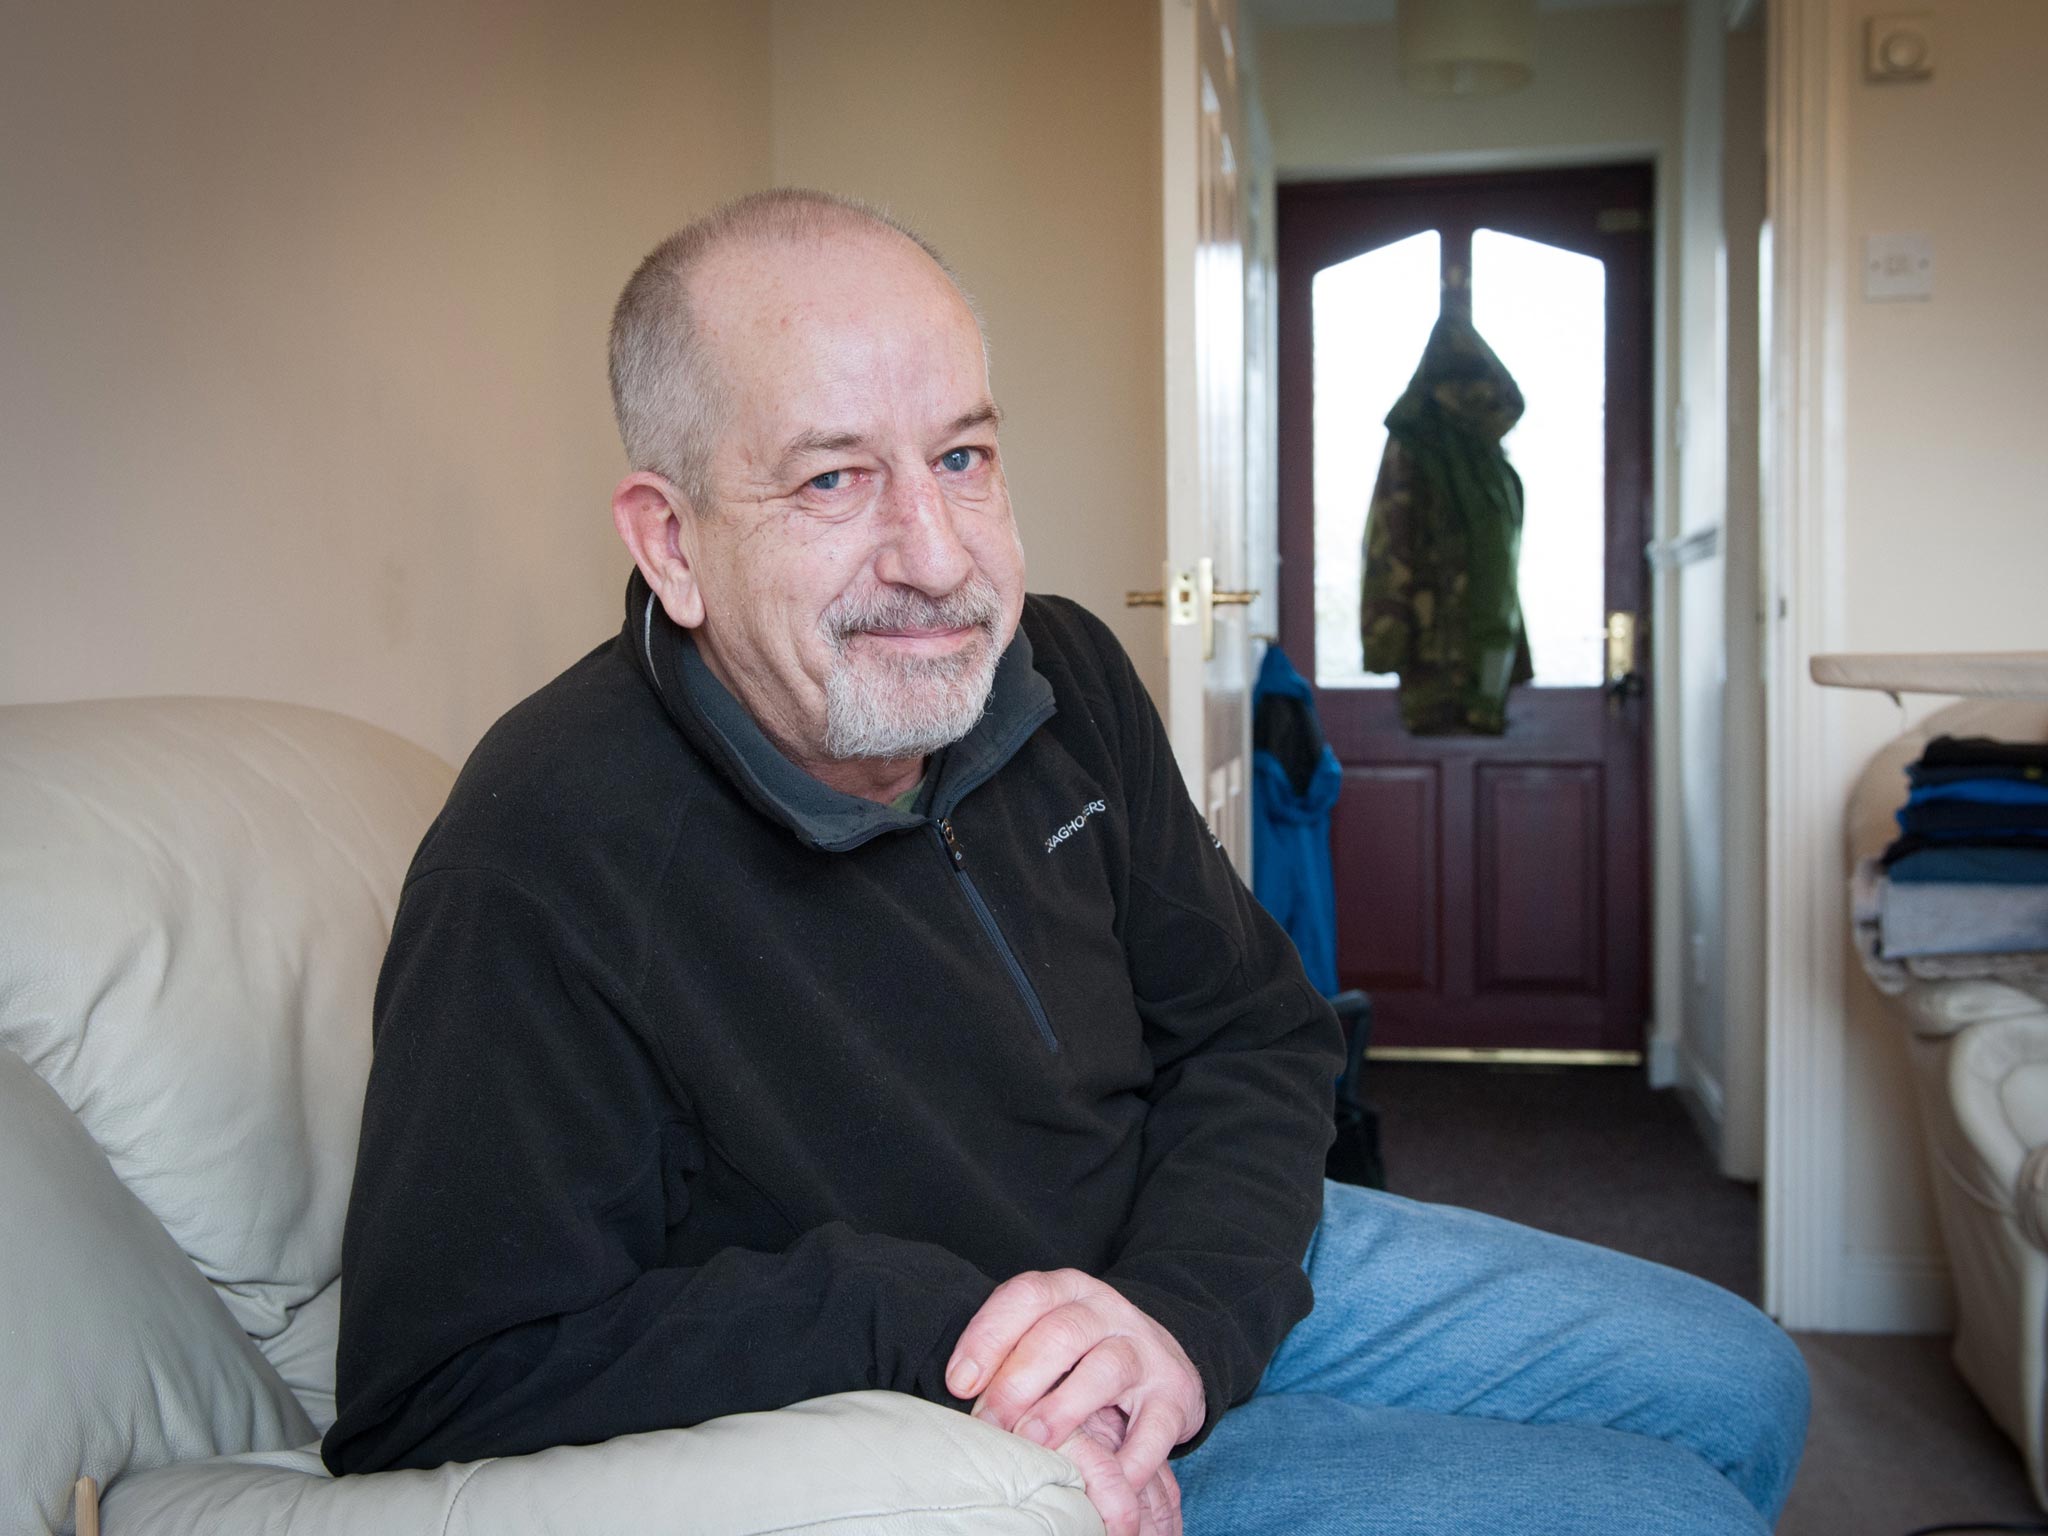 Alistair, from Clitheroe, wrote a letter to the Government over
the way his benefits have left him in poverty